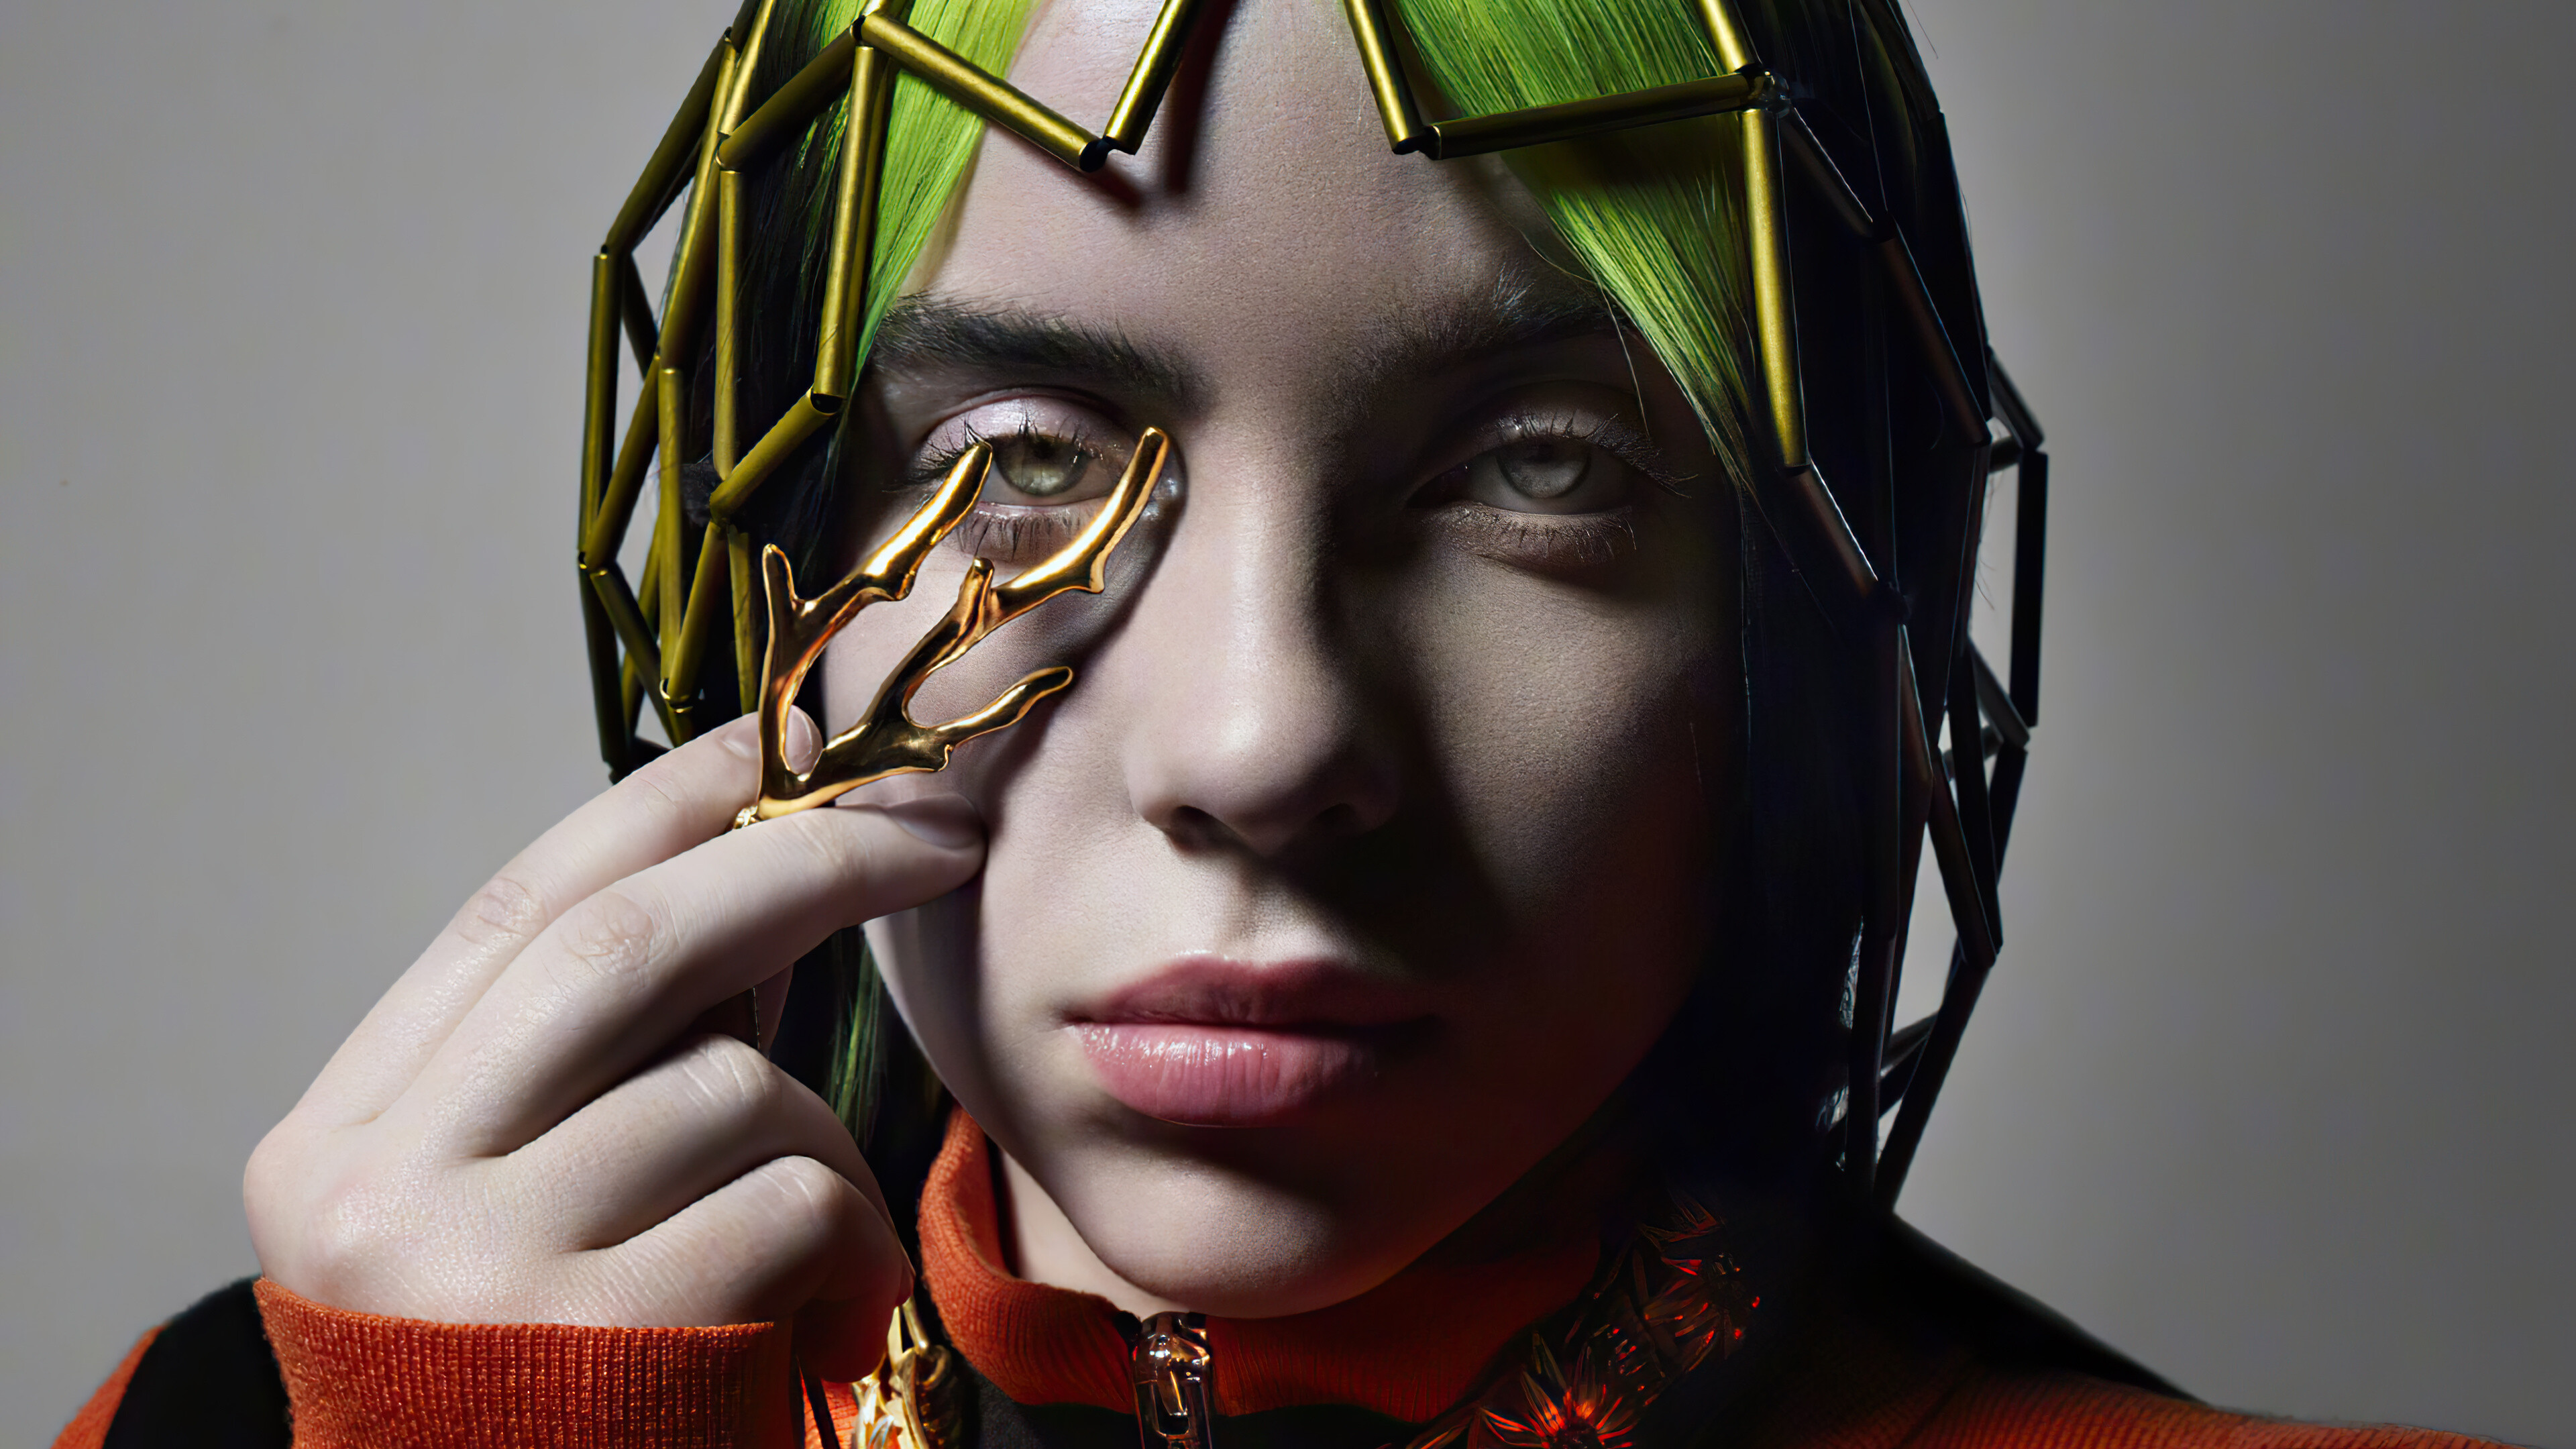 Billie Eilish: The first artist born in the 21st century to release a chart-topping single. 3840x2160 4K Background.